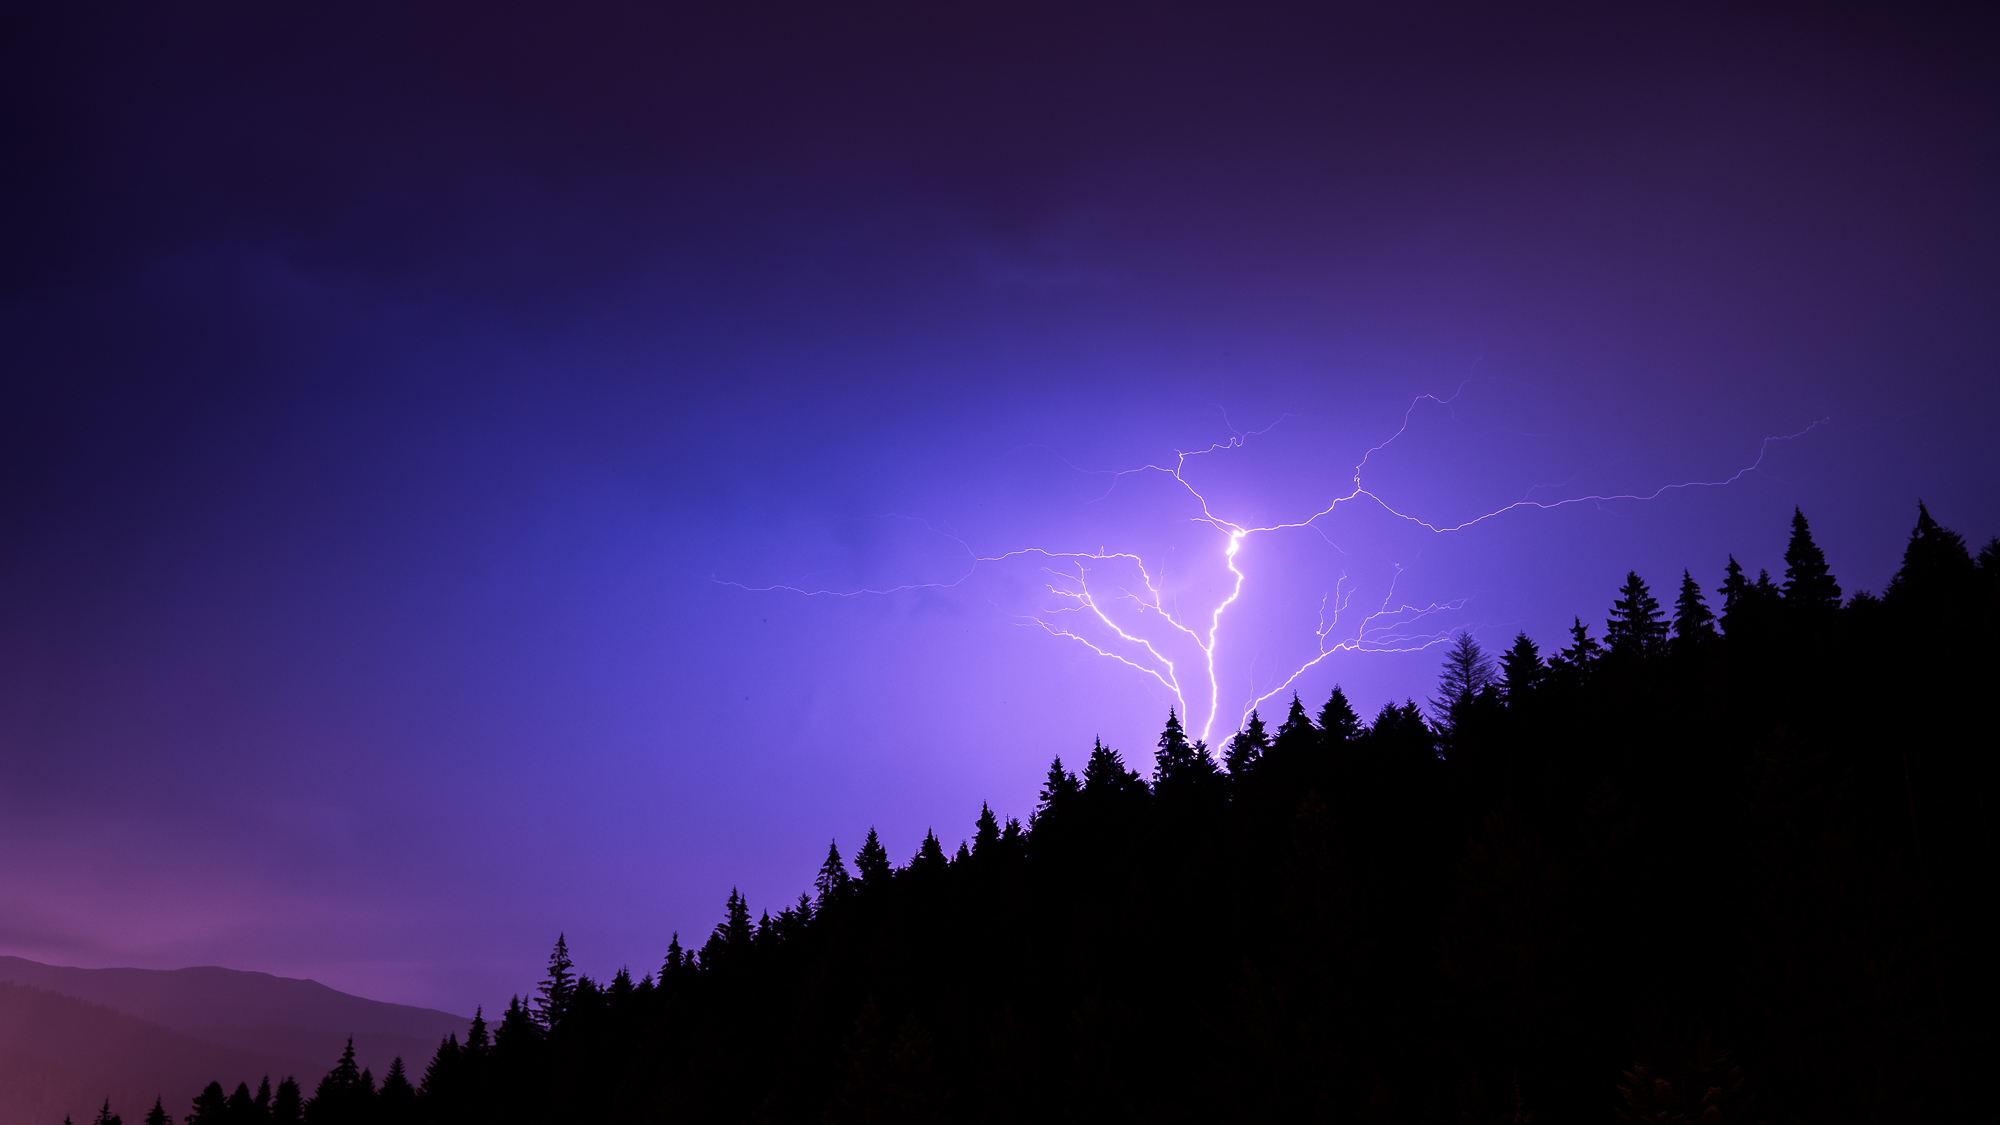 July is a great month to learn about science, meteorology & folklore through the lens of summer thunder storms!